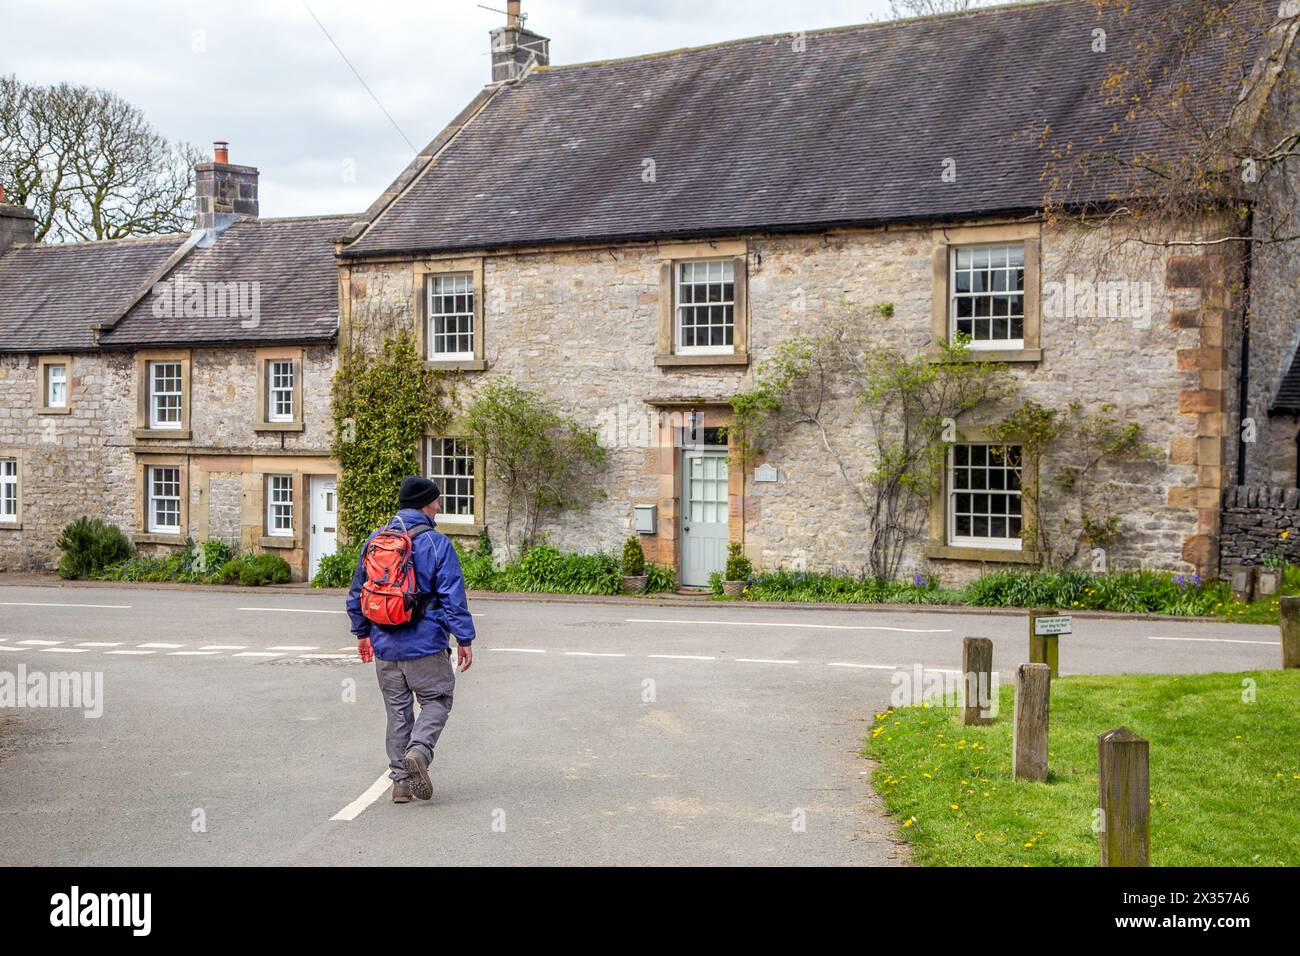 Man walking backpacking rambling through the Peak District village of Alstonefield the Staffordshire Moorlands District of the English Peak District Stock Photo